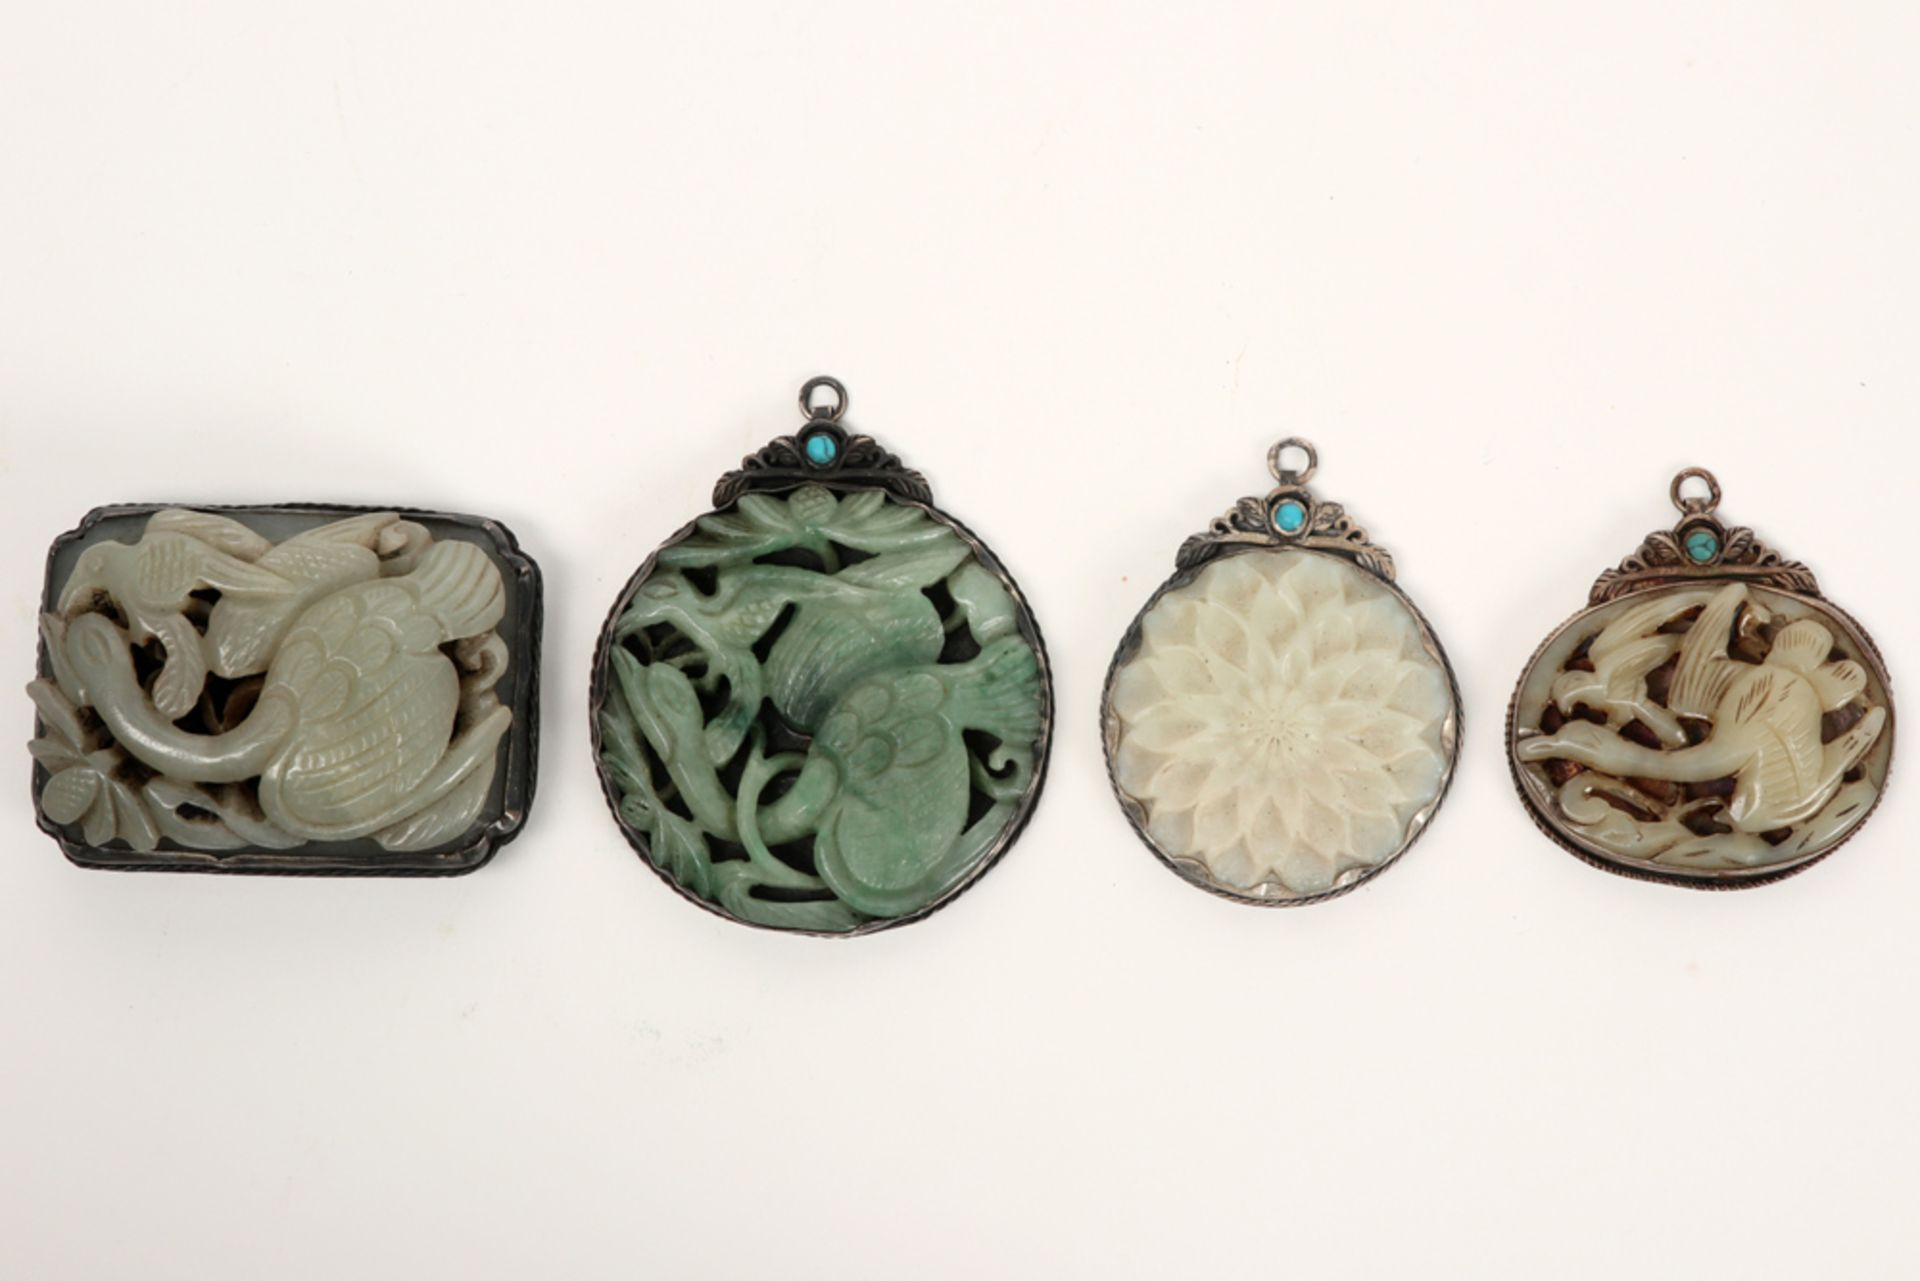 three Chinese pendants and a buckle in marked silver and jade || Lot (4) van drie Chinese